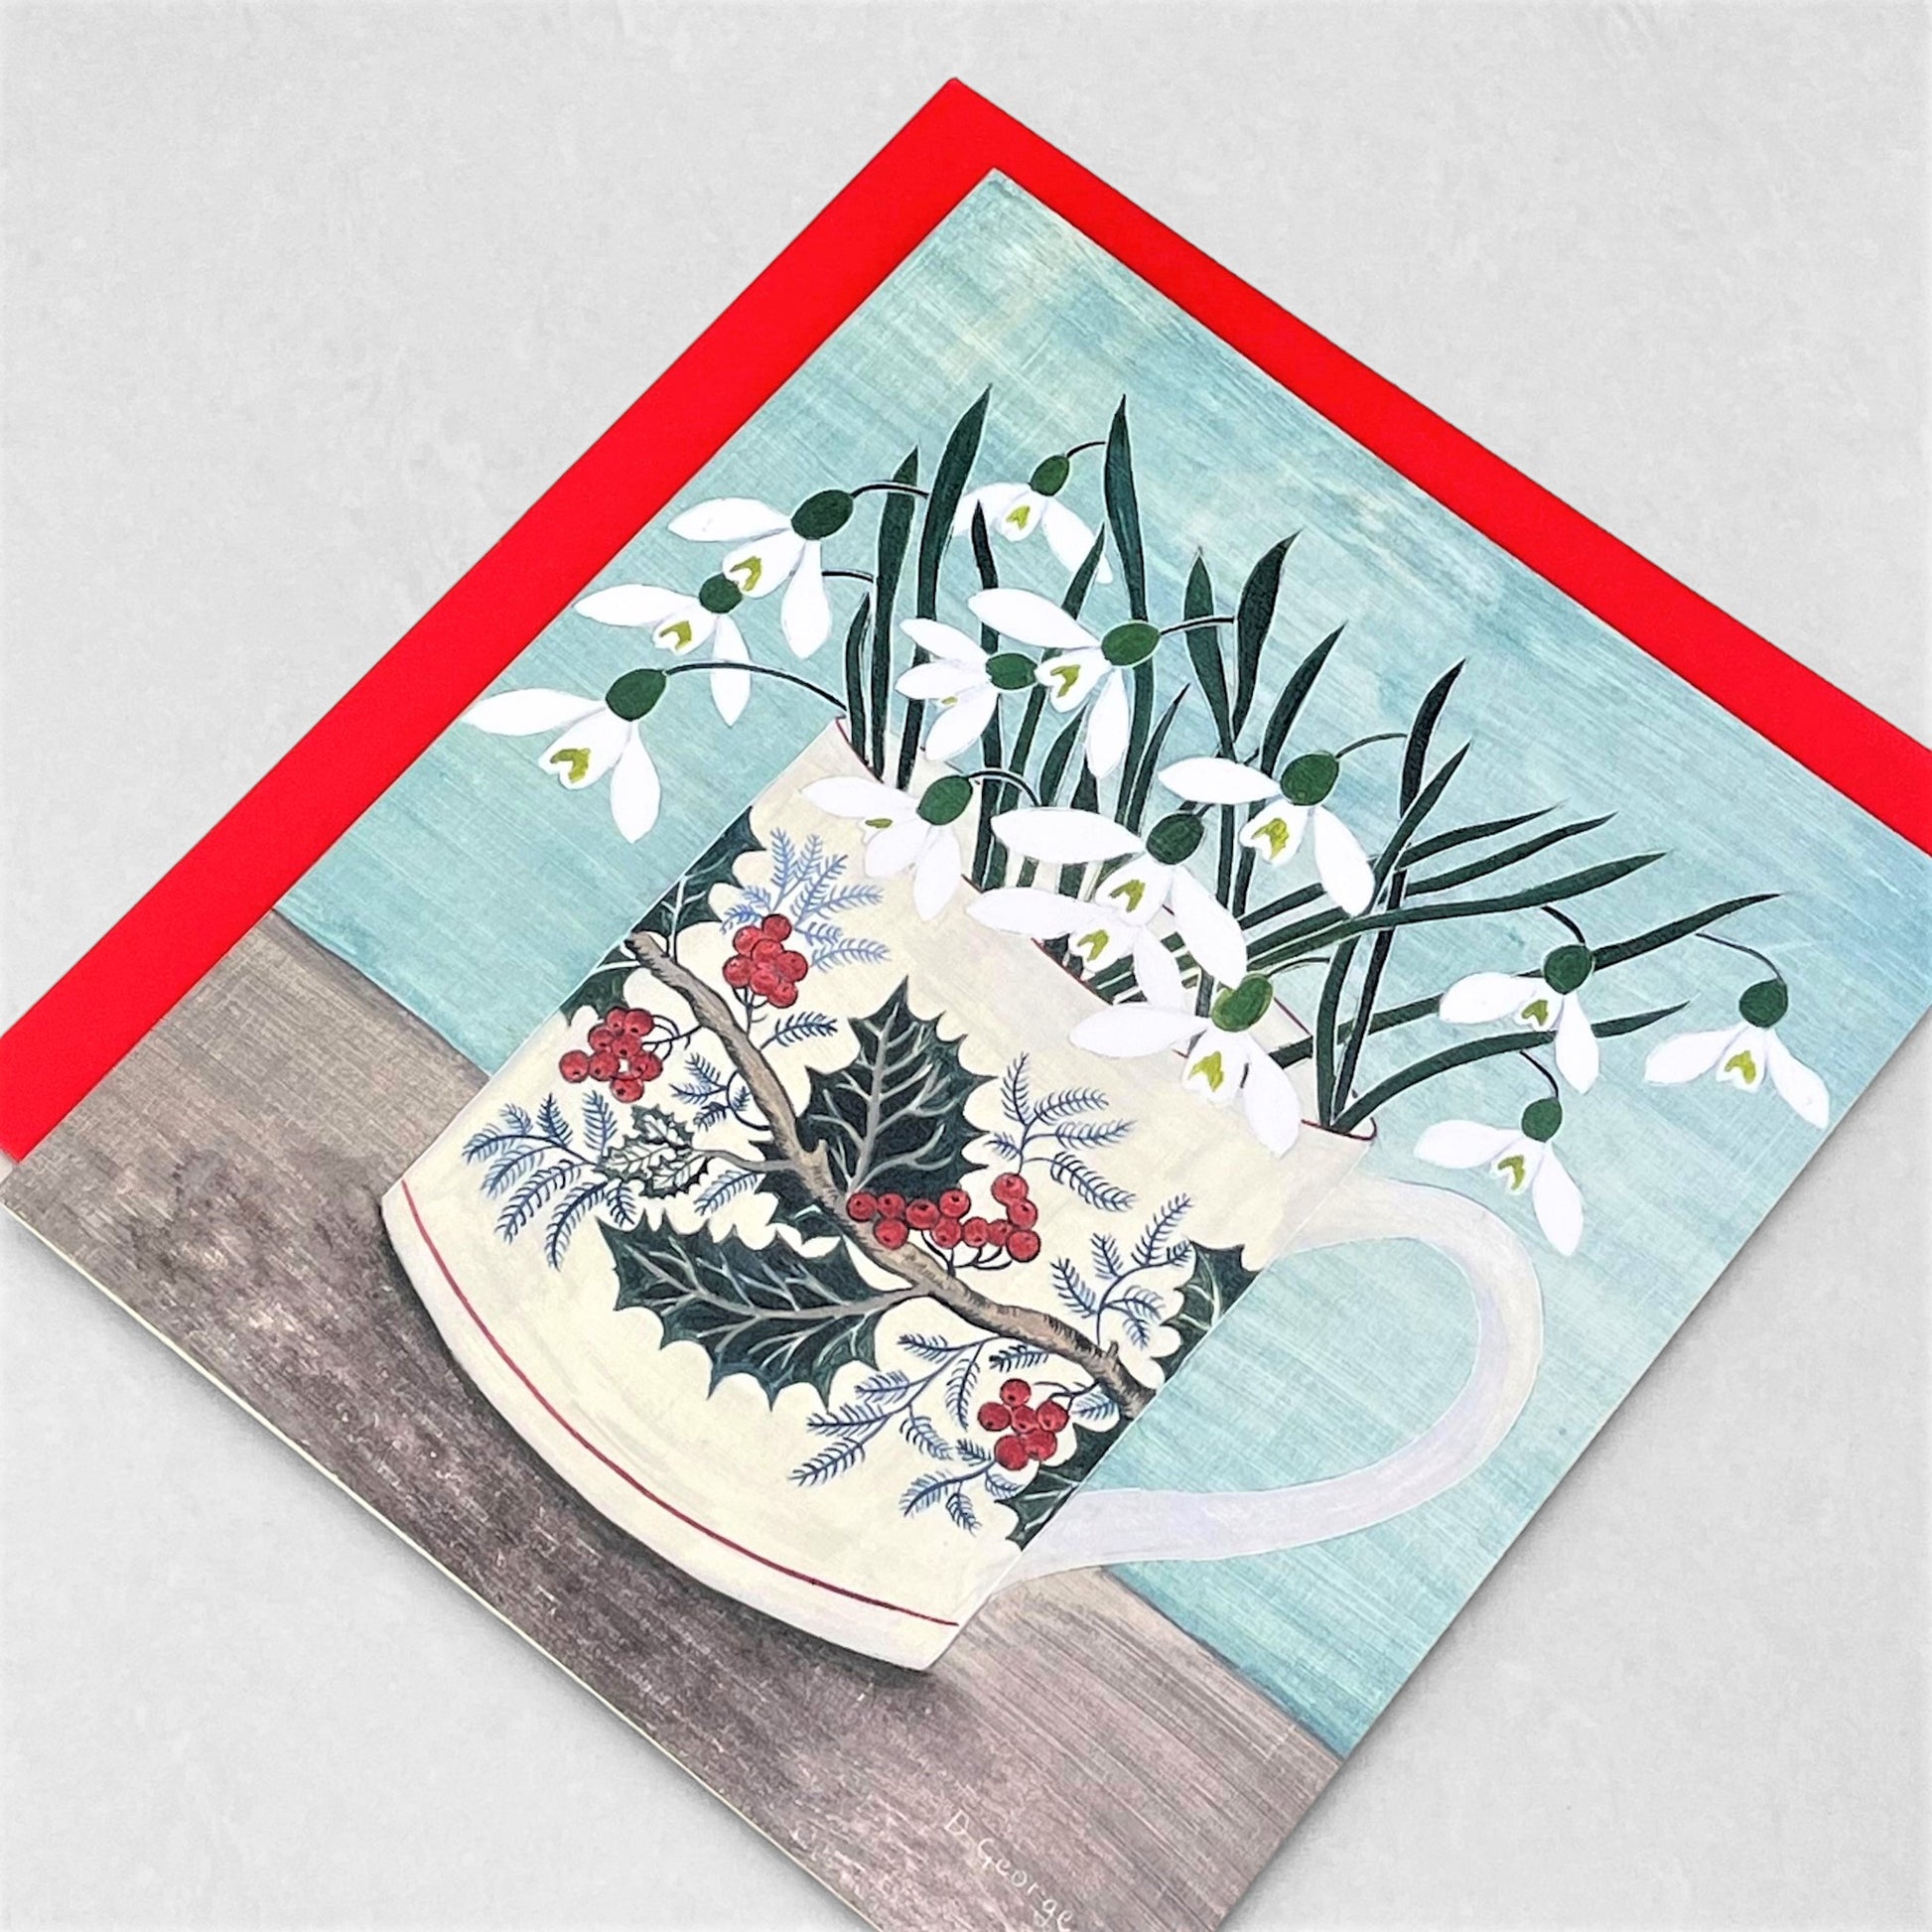 greetings card showing a decorated cup with snowdrops inside by Canns Down Press